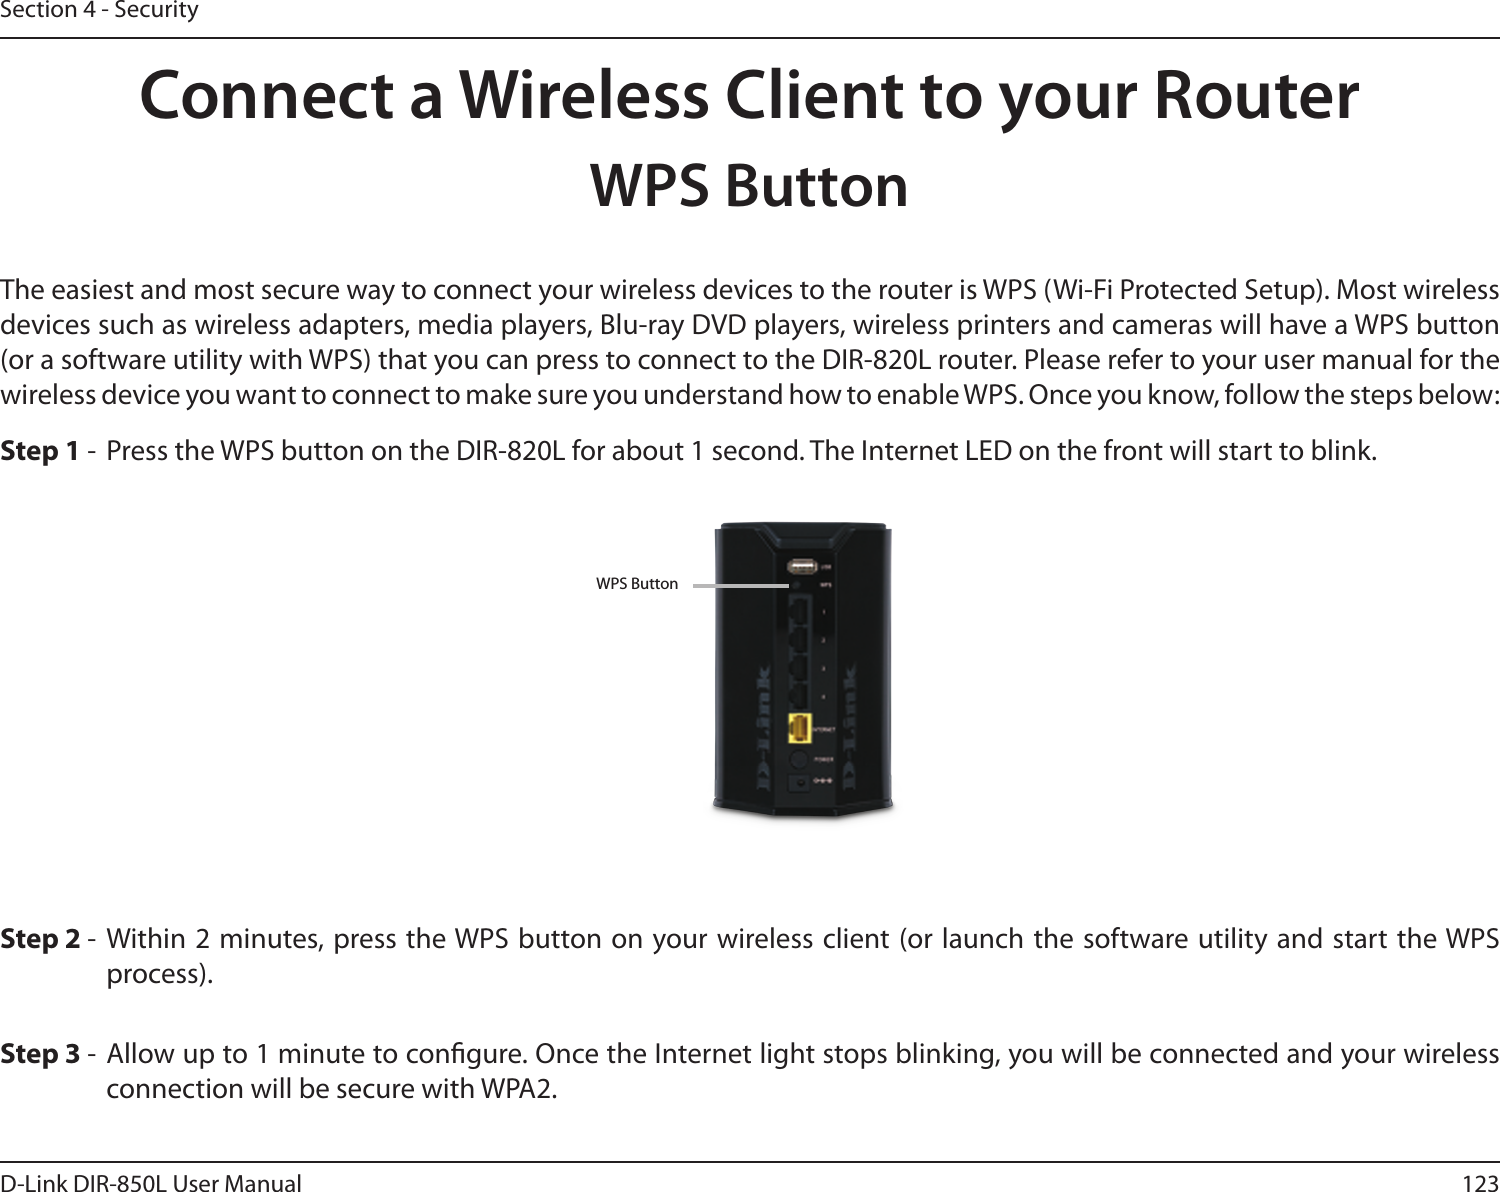 123D-Link DIR-850L User ManualSection 4 - SecurityConnect a Wireless Client to your RouterWPS ButtonStep 2 -  Within 2 minutes, press the WPS button on your wireless client (or launch the software utility and start the WPS process).The easiest and most secure way to connect your wireless devices to the router is WPS (Wi-Fi Protected Setup). Most wireless devices such as wireless adapters, media players, Blu-ray DVD players, wireless printers and cameras will have a WPS button (or a software utility with WPS) that you can press to connect to the DIR-820L router. Please refer to your user manual for the wireless device you want to connect to make sure you understand how to enable WPS. Once you know, follow the steps below:Step 1 -  Press the WPS button on the DIR-820L for about 1 second. The Internet LED on the front will start to blink.Step 3 -  Allow up to 1 minute to congure. Once the Internet light stops blinking, you will be connected and your wireless connection will be secure with WPA2.WPS Button